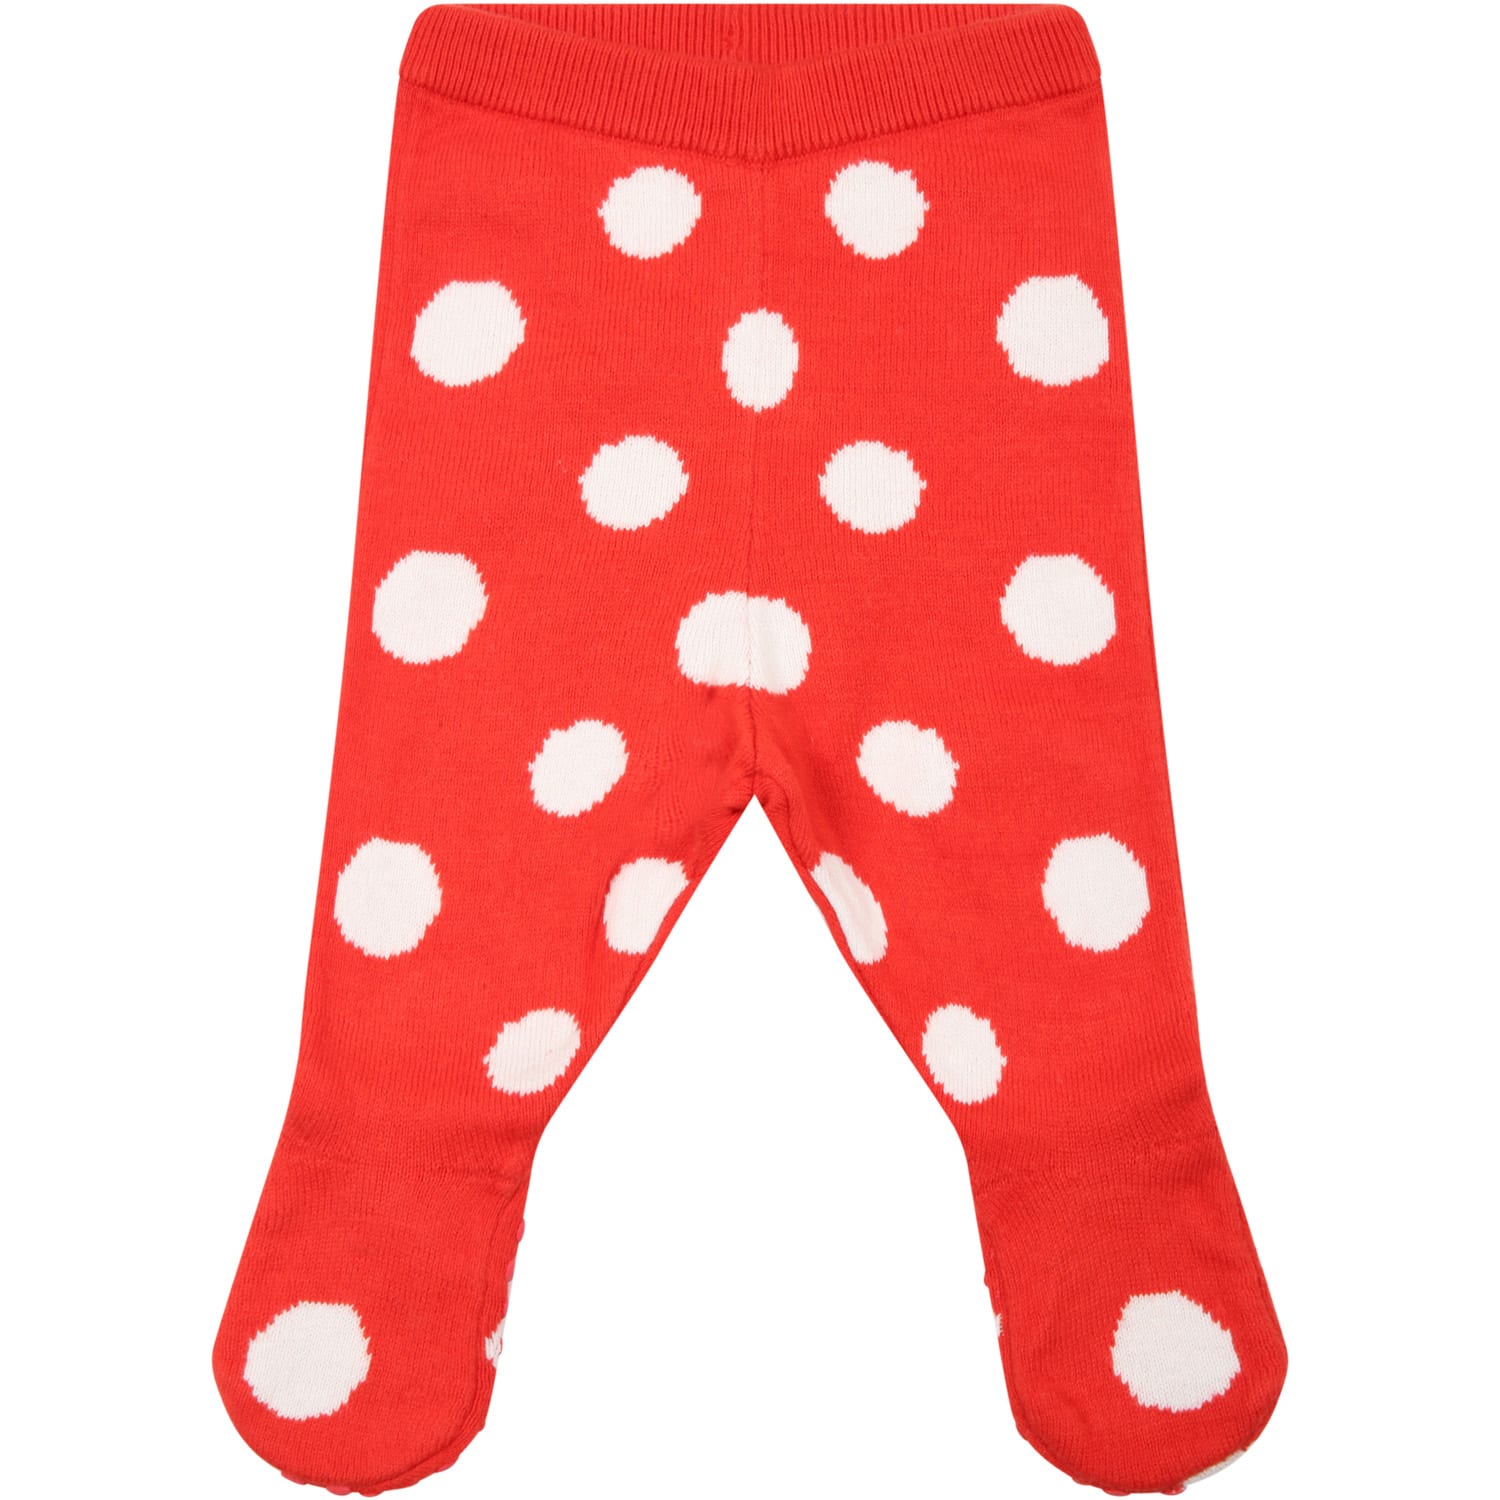 Stella McCartney Kids Red Gaiter For Baby Girl With Polka Dots